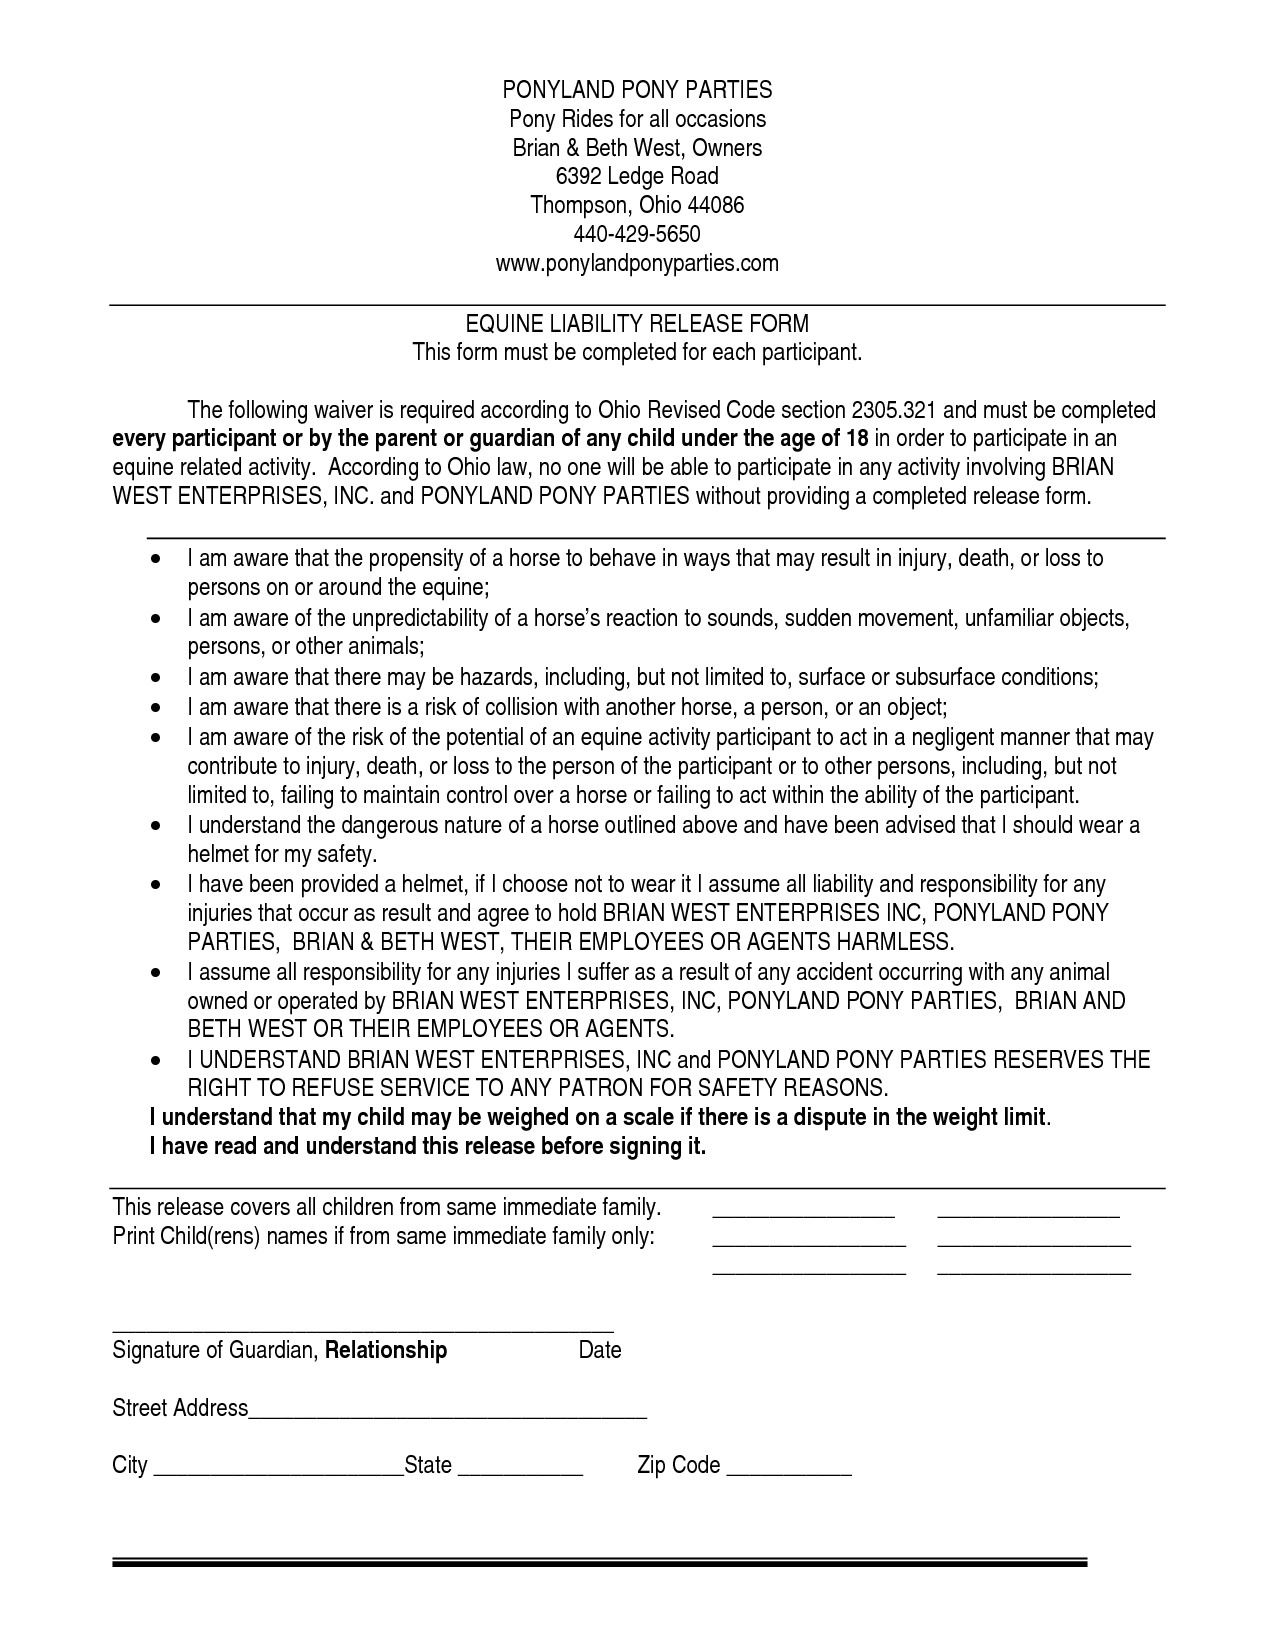 printable-insurance-waiver-form-free-printable-liability-release